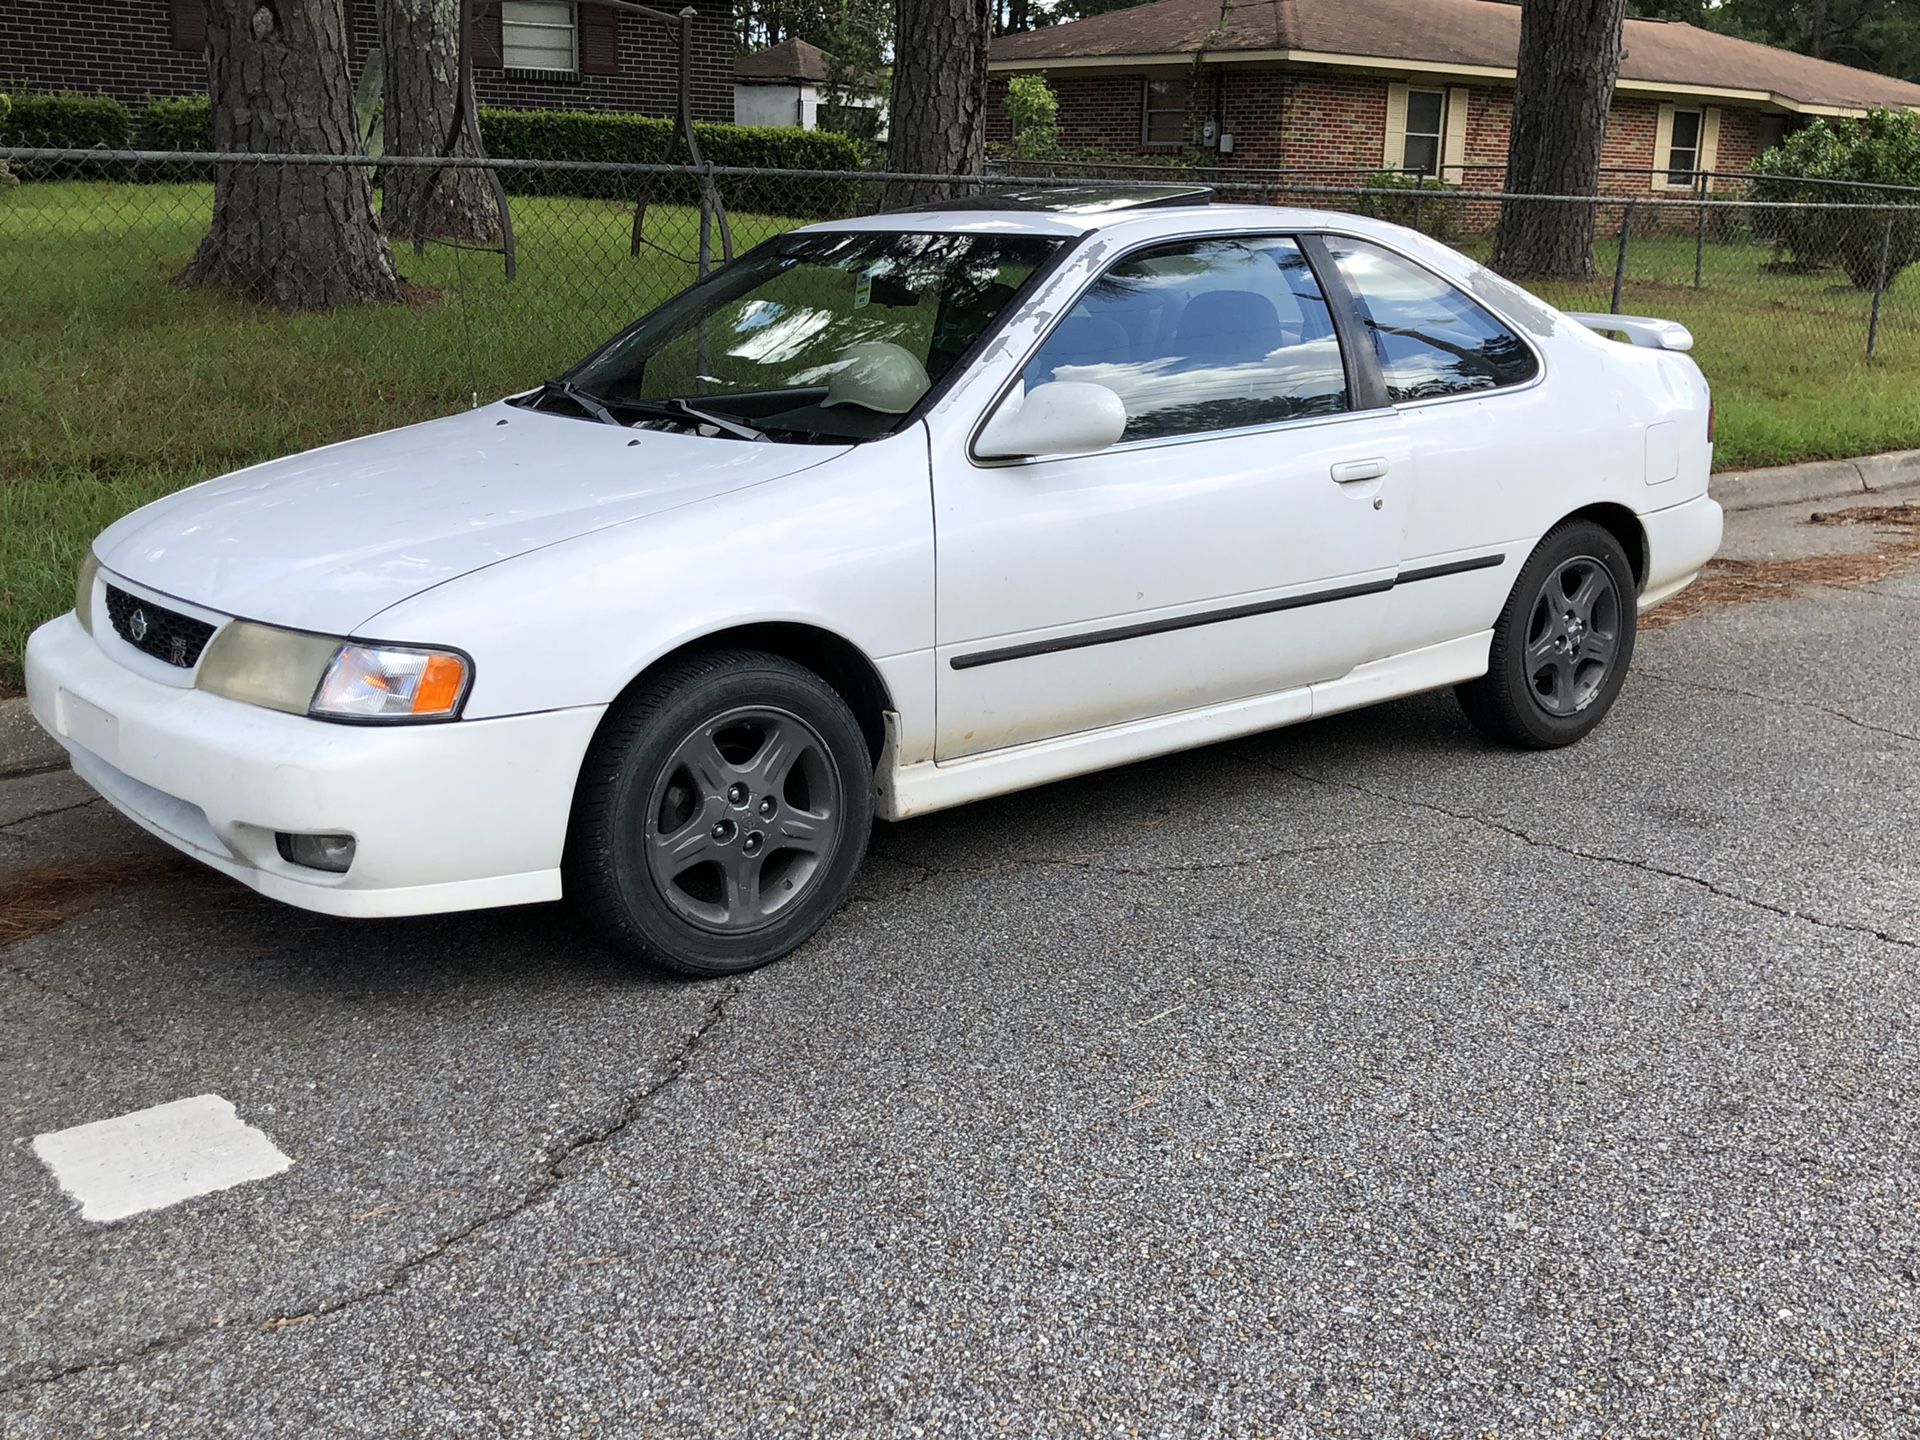 Photo 1996 Nissan 200sx. 182,000 miles. Great car. Ac works great it drives good its a overall good car. Ready to ride. Clean title in hand. $1800 or trad